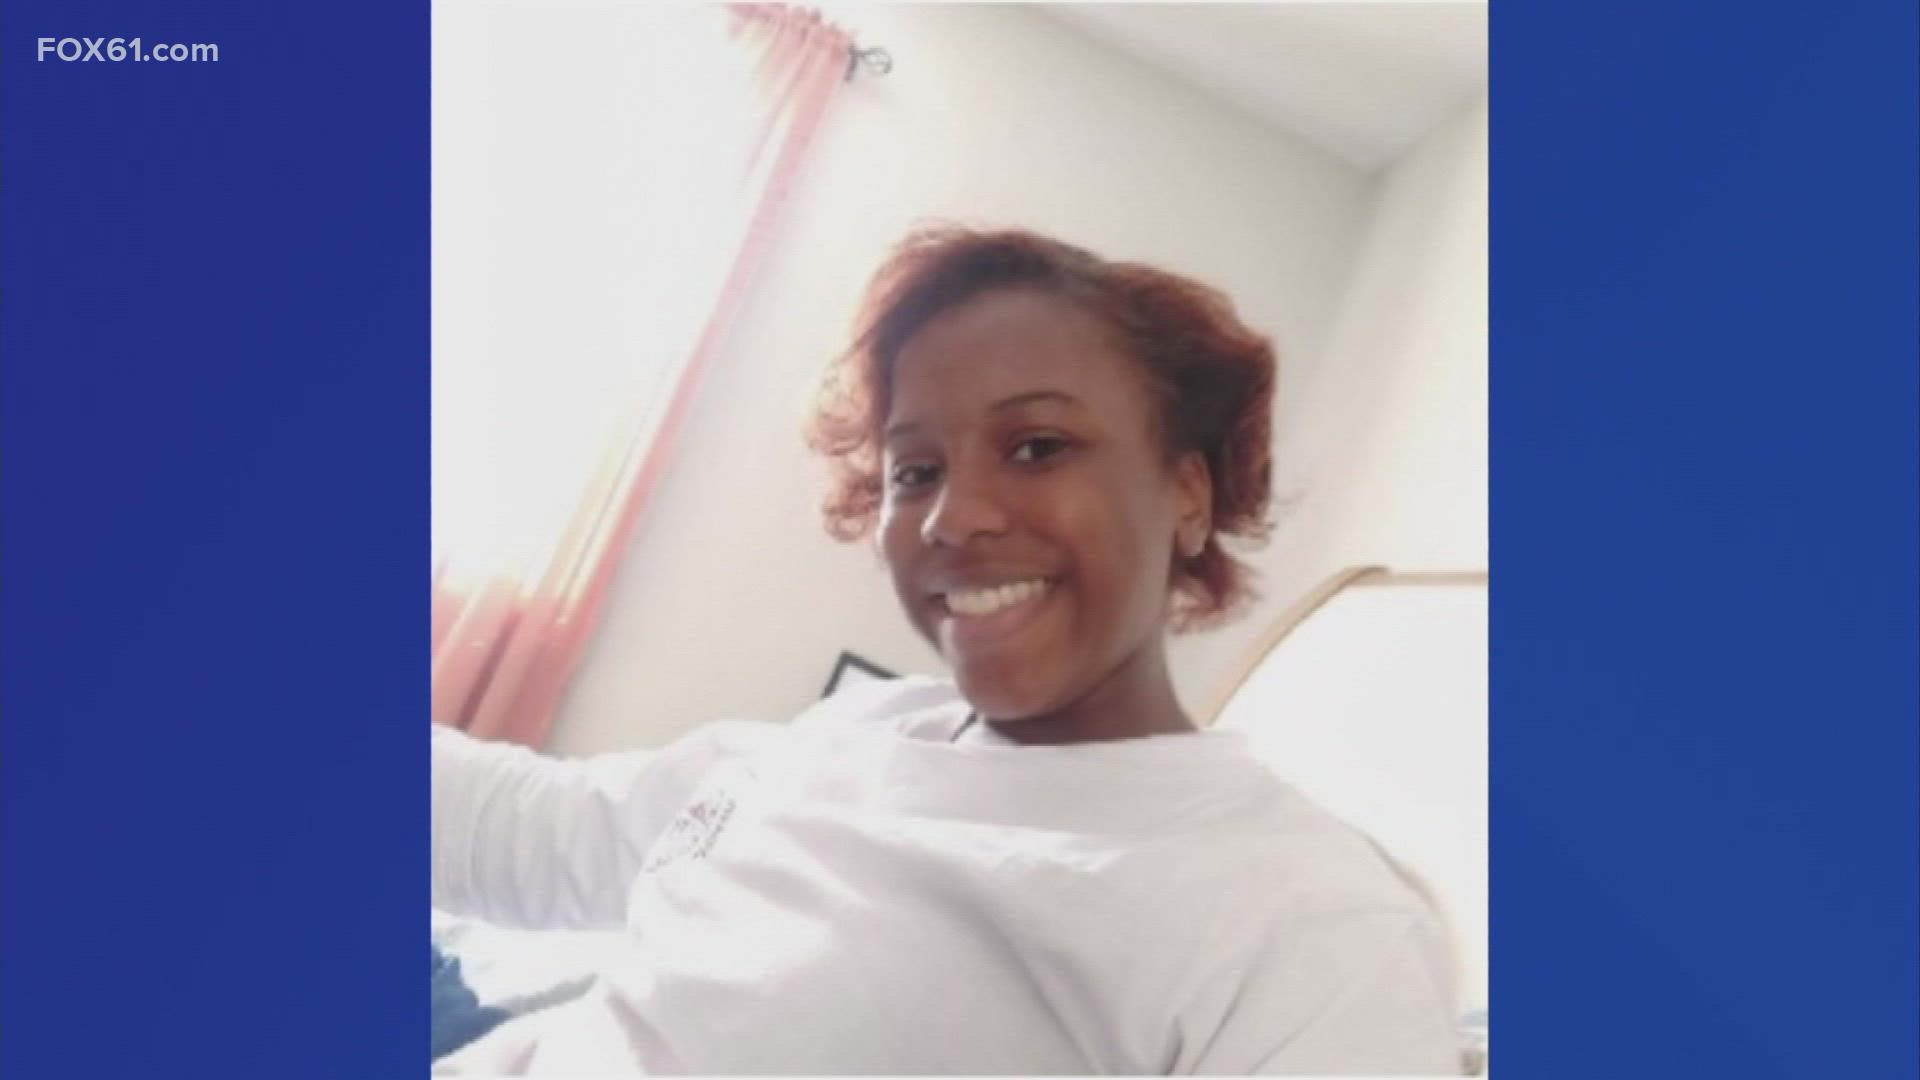 A family is full of frustration over the investigation into the disappearance of 22-year-old aspiring pharmacist Sherrian Howe, who went missing seven weeks ago.